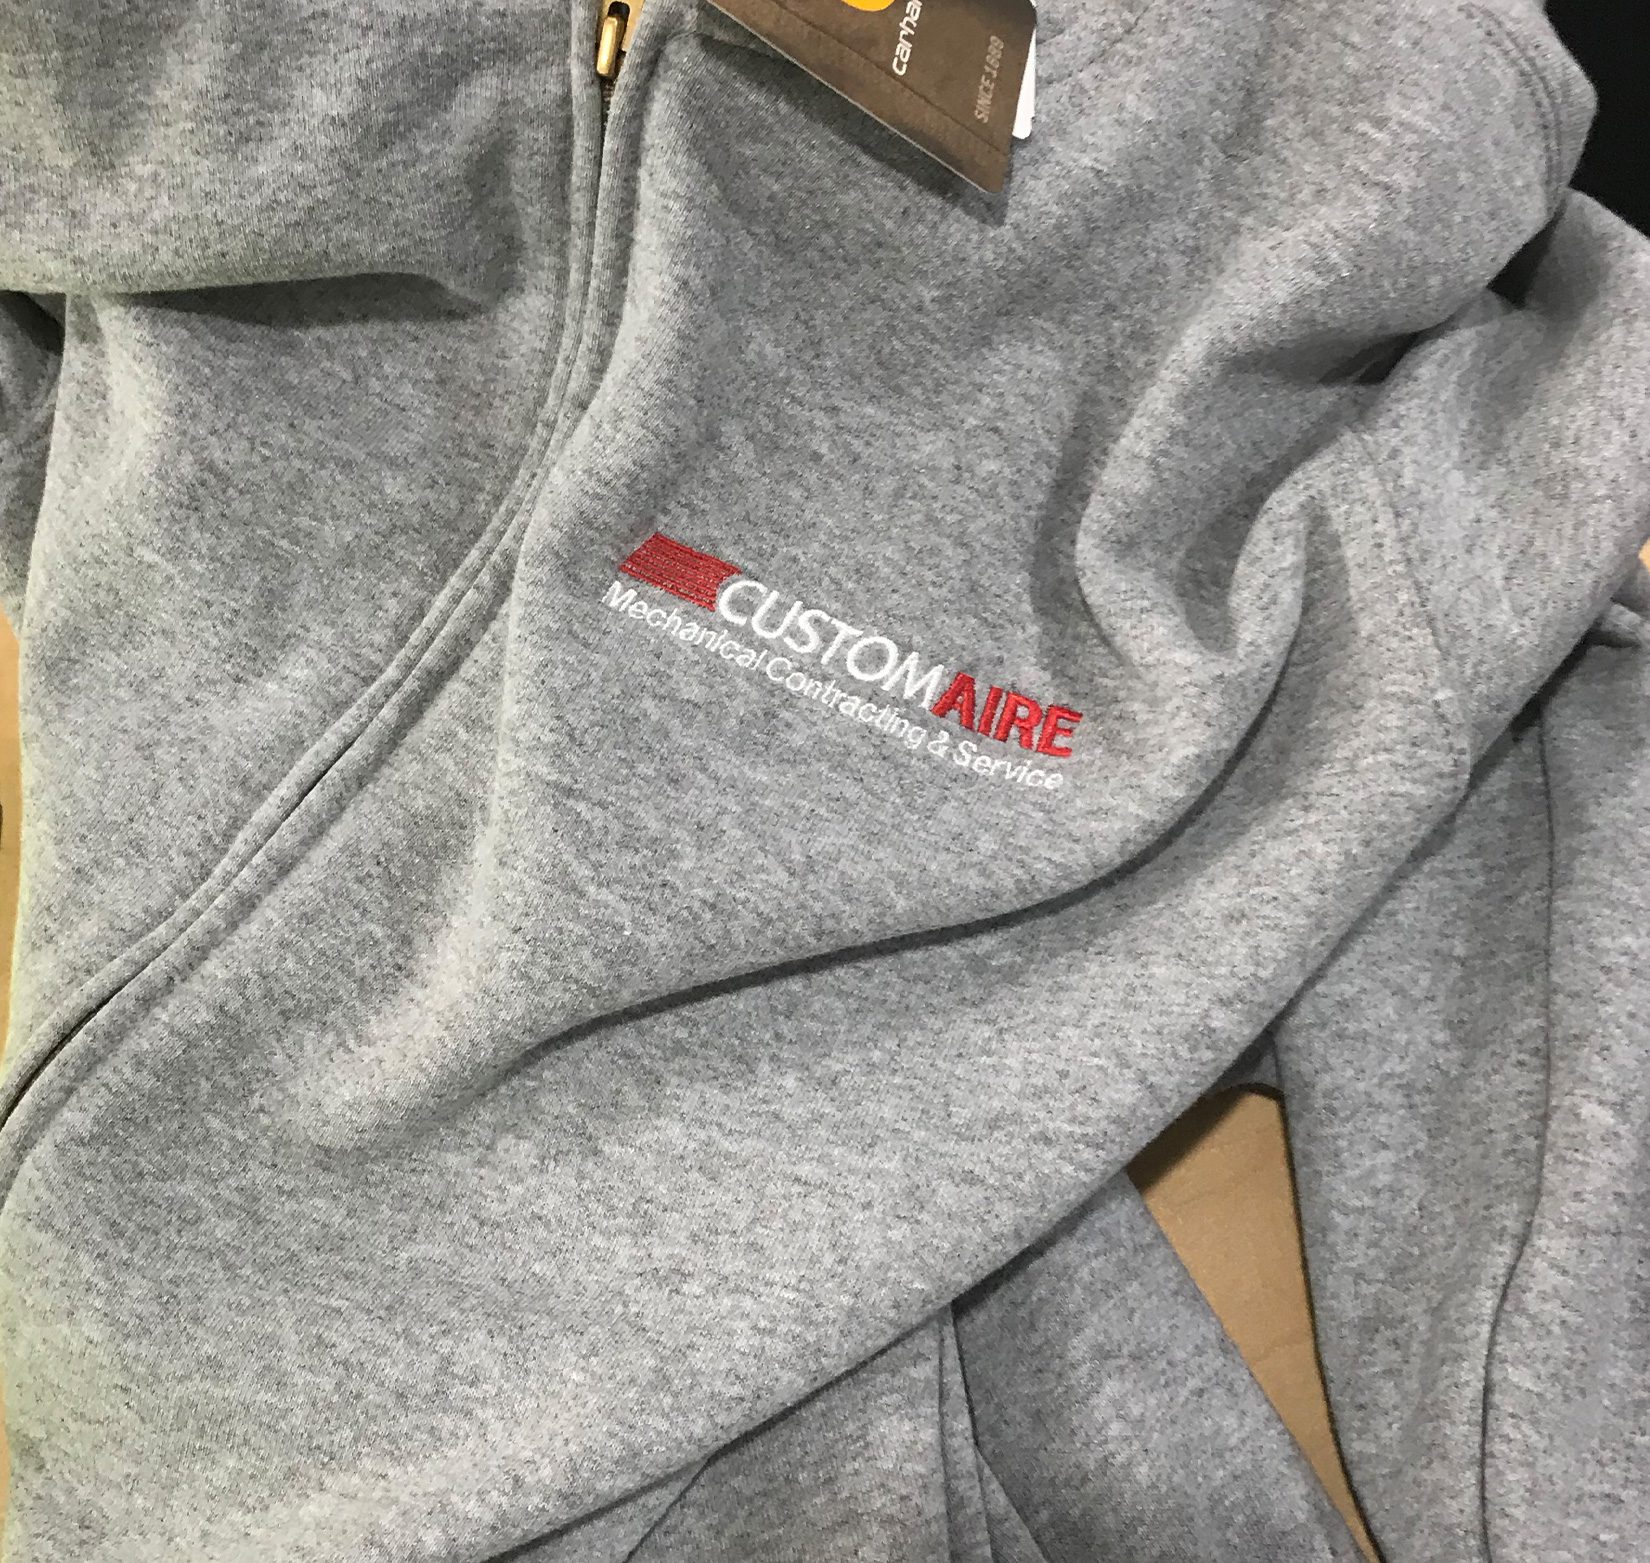 A close up of a white and red Custom Aire logo embroidered on a gray hoodie